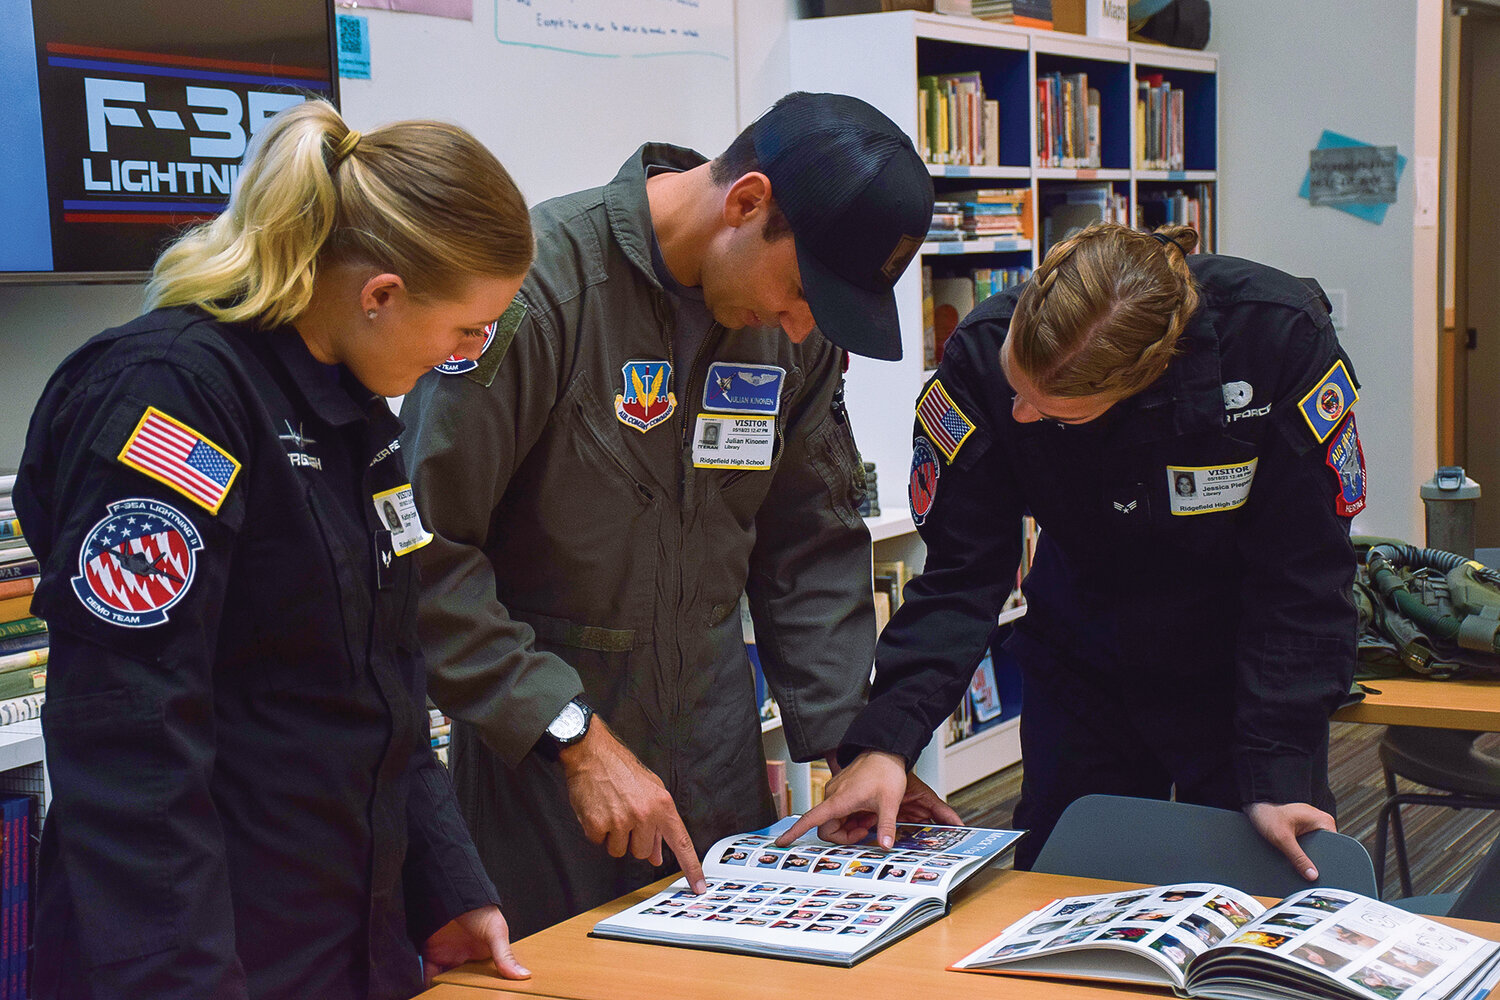 U.S. Air Force Capt. Julian Kinonen, center, looks at old yearbook photos of himself alongside Air Force Senior Airmen Kaitlyn Ergish, left, and Jessica Peiper, right, at Ridgefield High School on May 18.